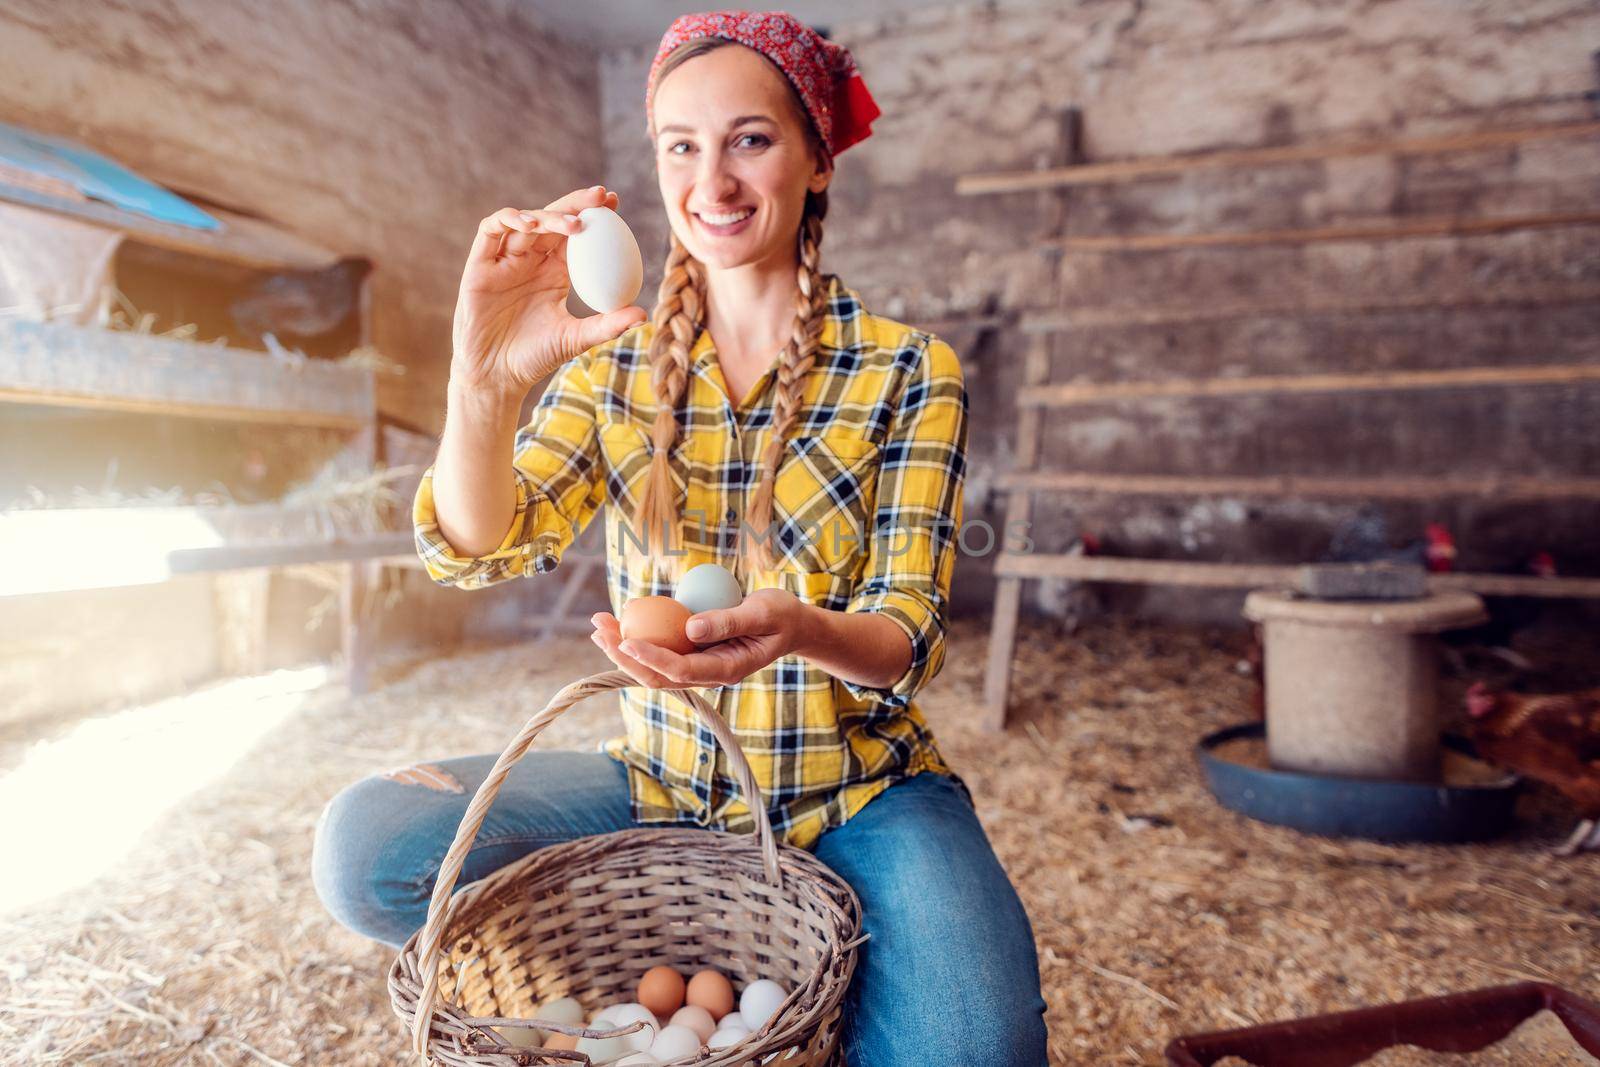 Famer woman collecting organic eggs from her hens in basket